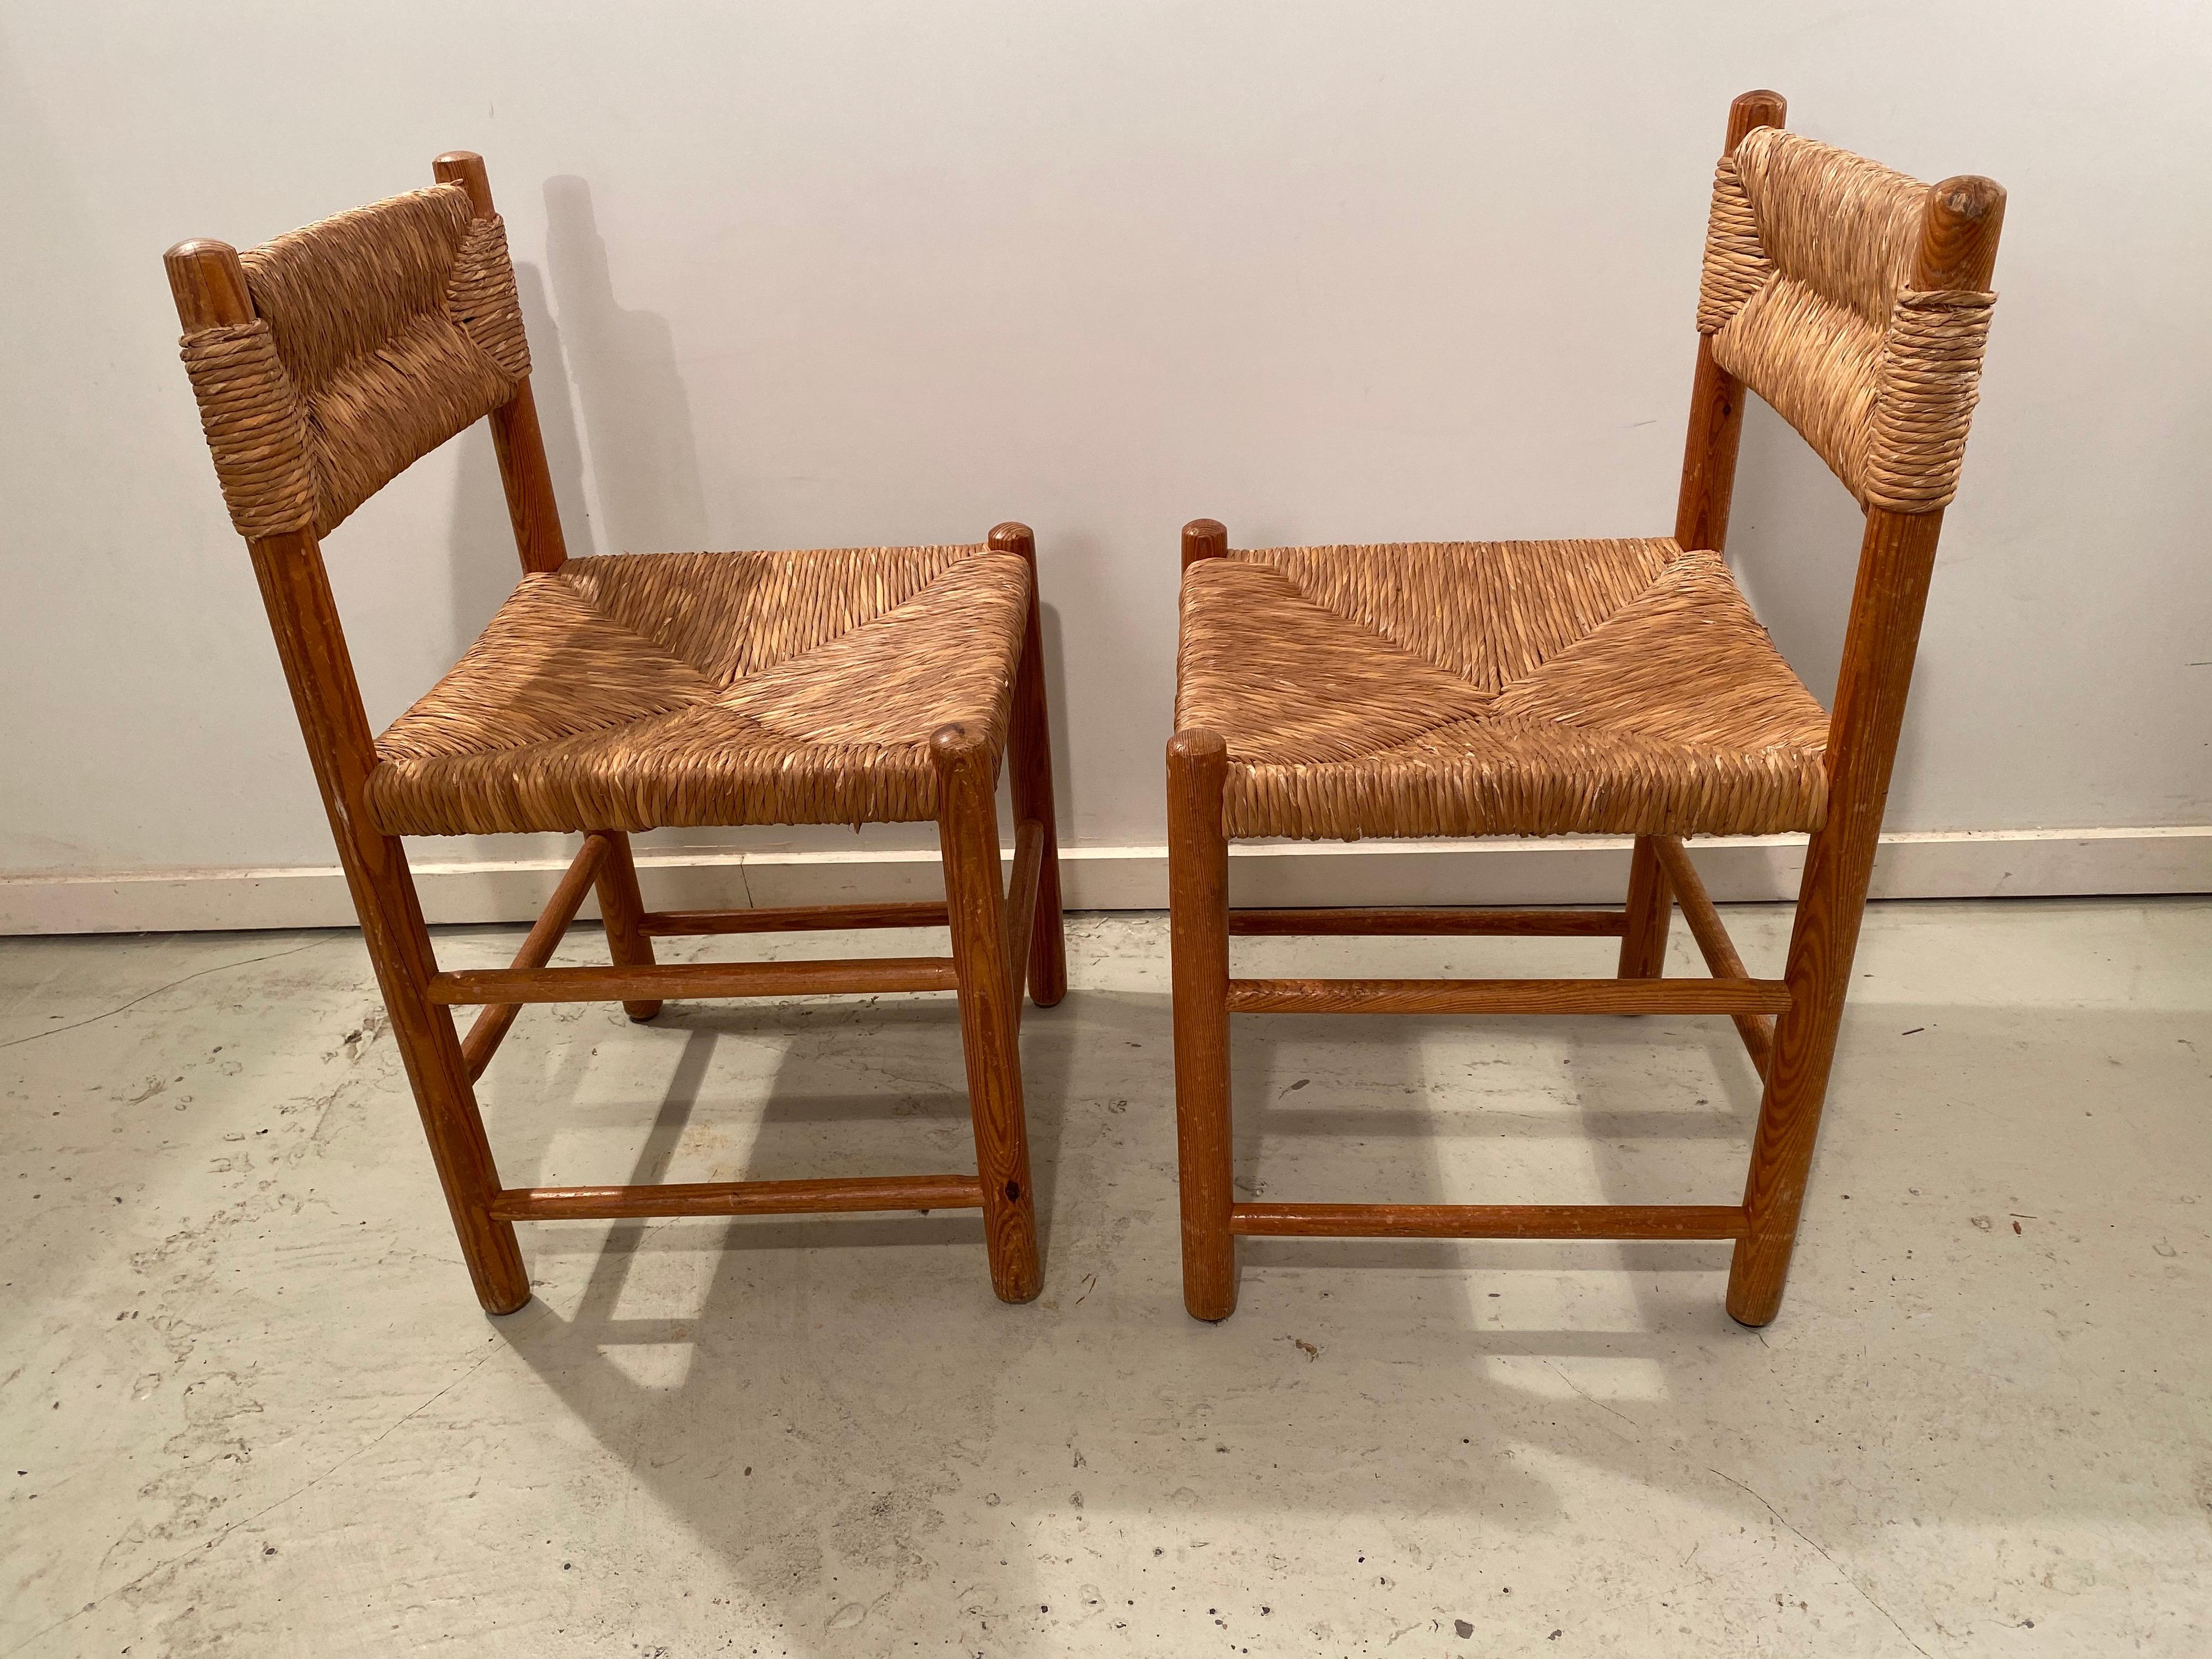 French Pair of Wicker Dordogne Chairs by Charlotte Perriand for Sentou, 1950s For Sale